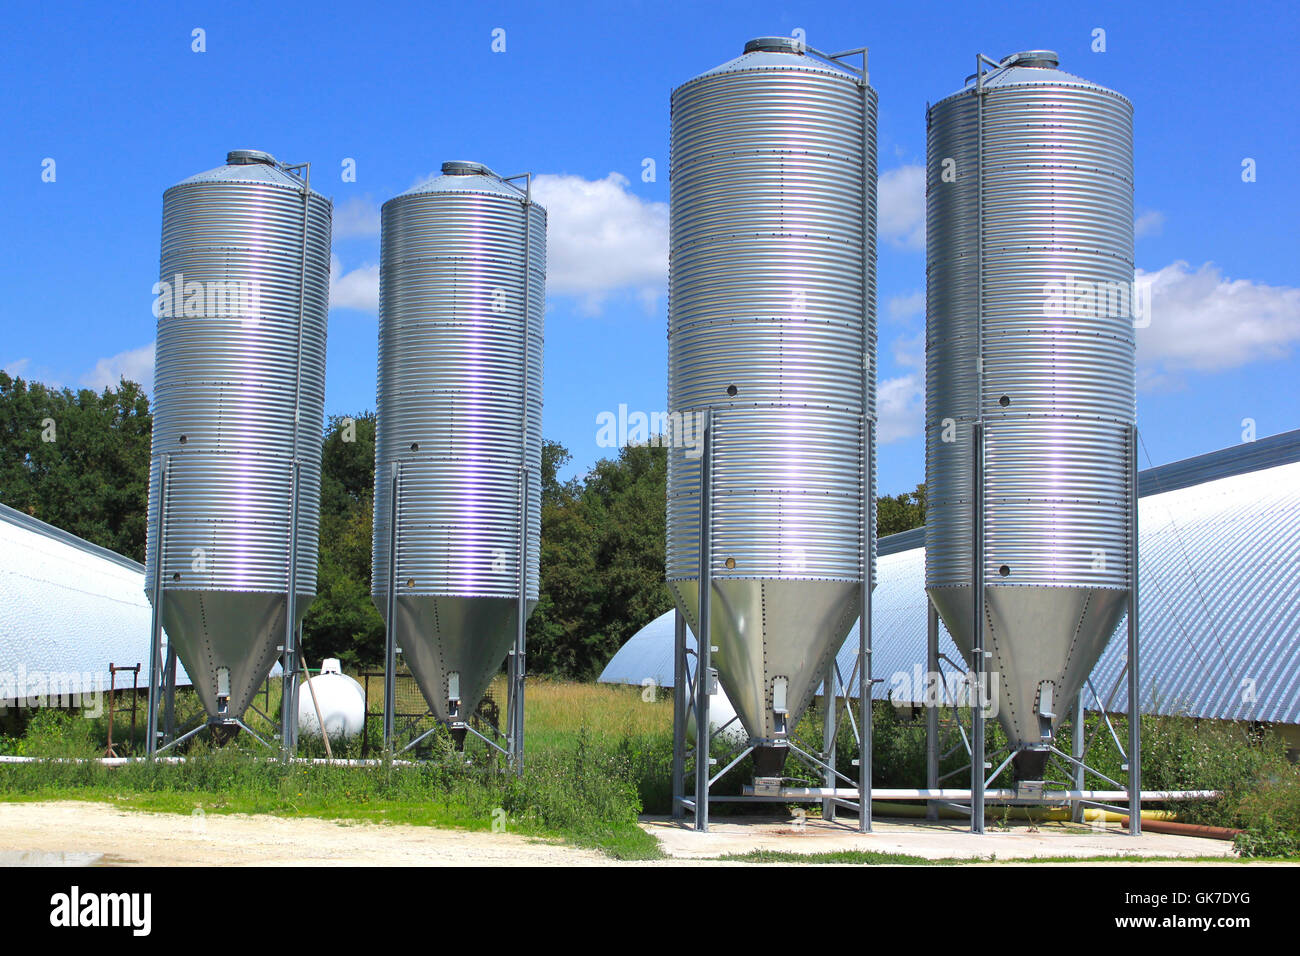 industry agriculture farming Stock Photo